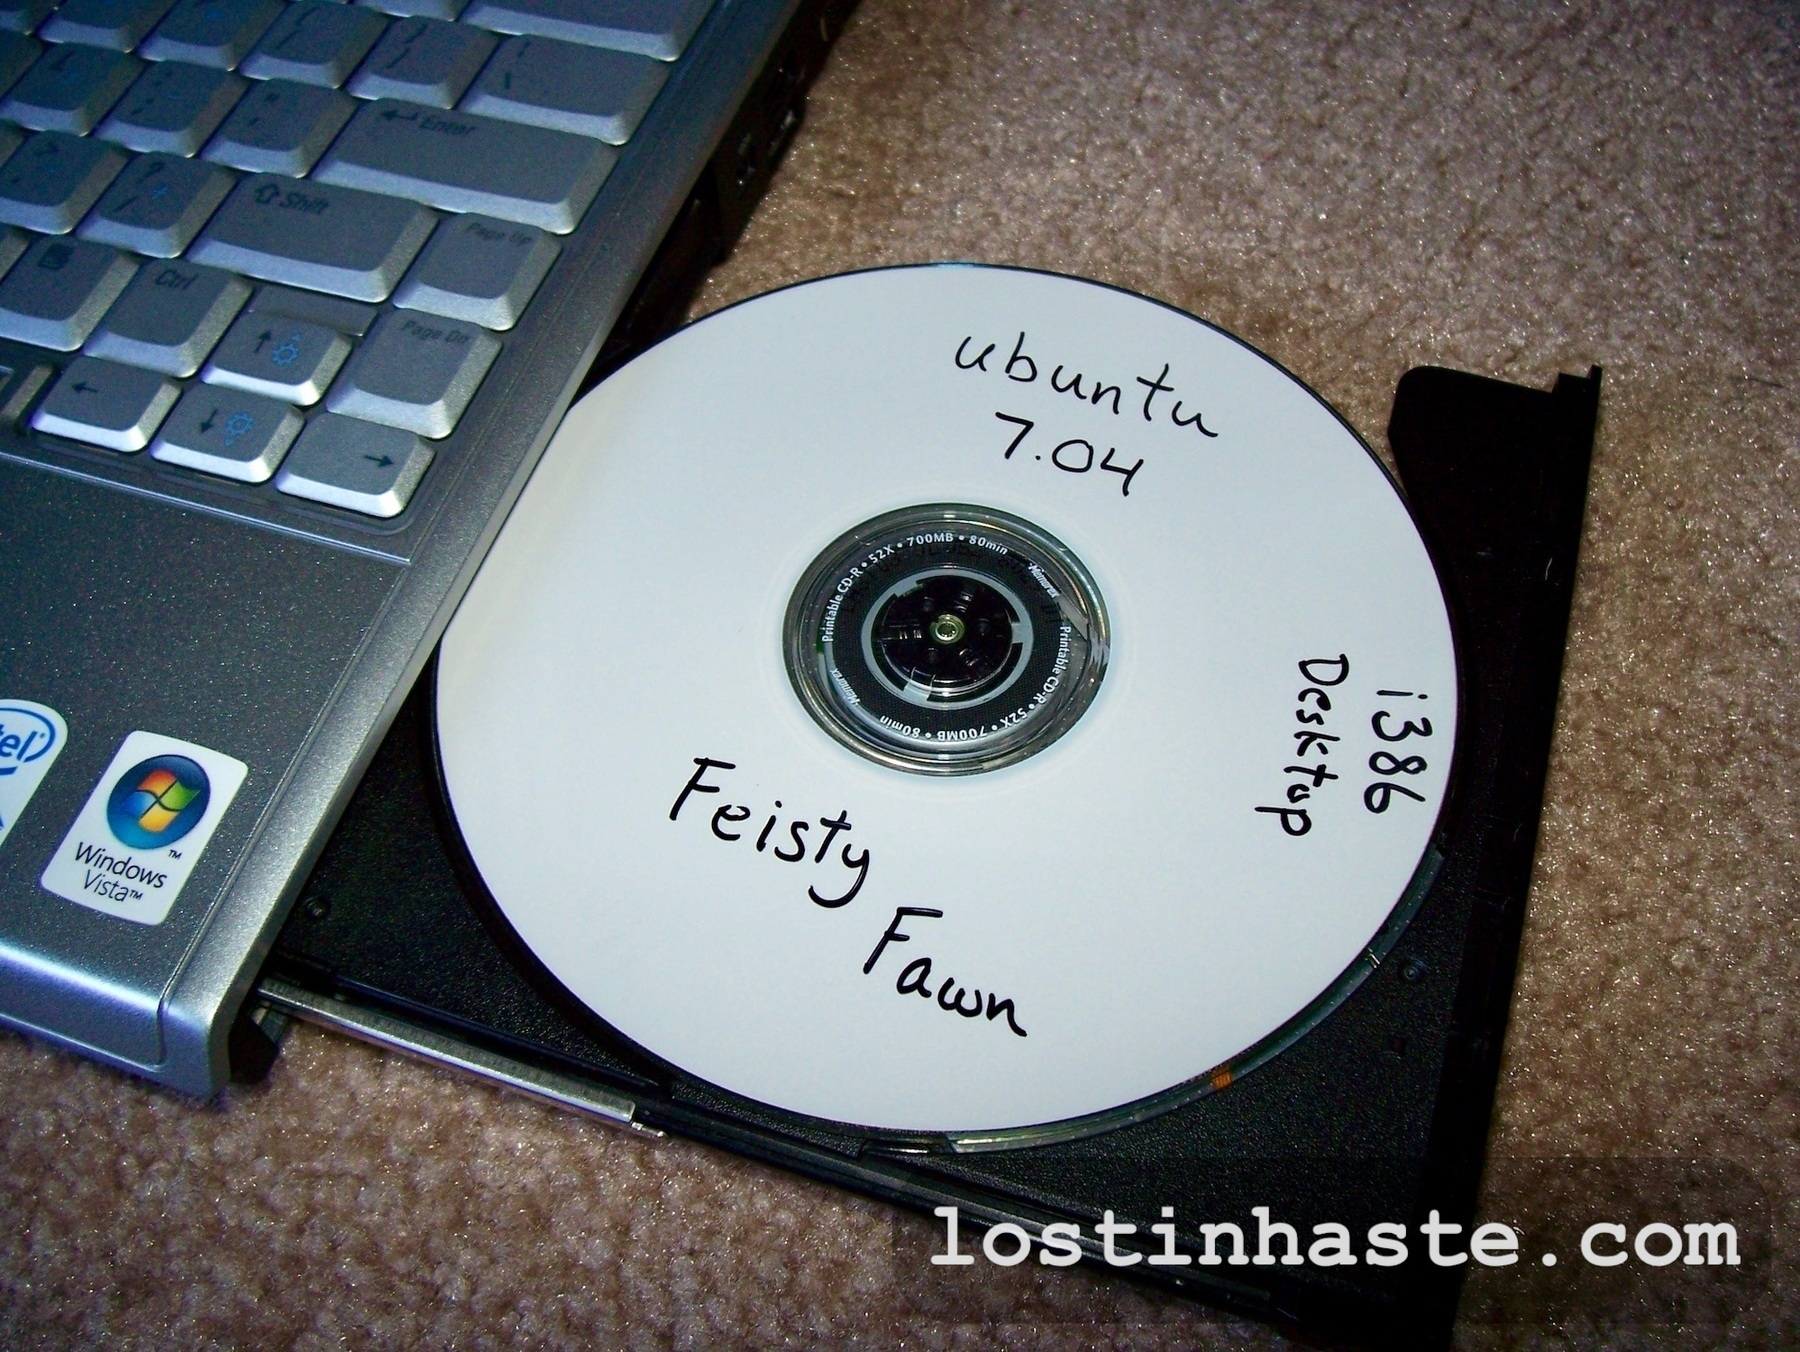 A CD labeled 'Ubuntu 7.04 Feisty Fawn Desktop i386' rests beside an open laptop on a carpeted floor. The website 'lostinhaste.com' is visible on the laptop.